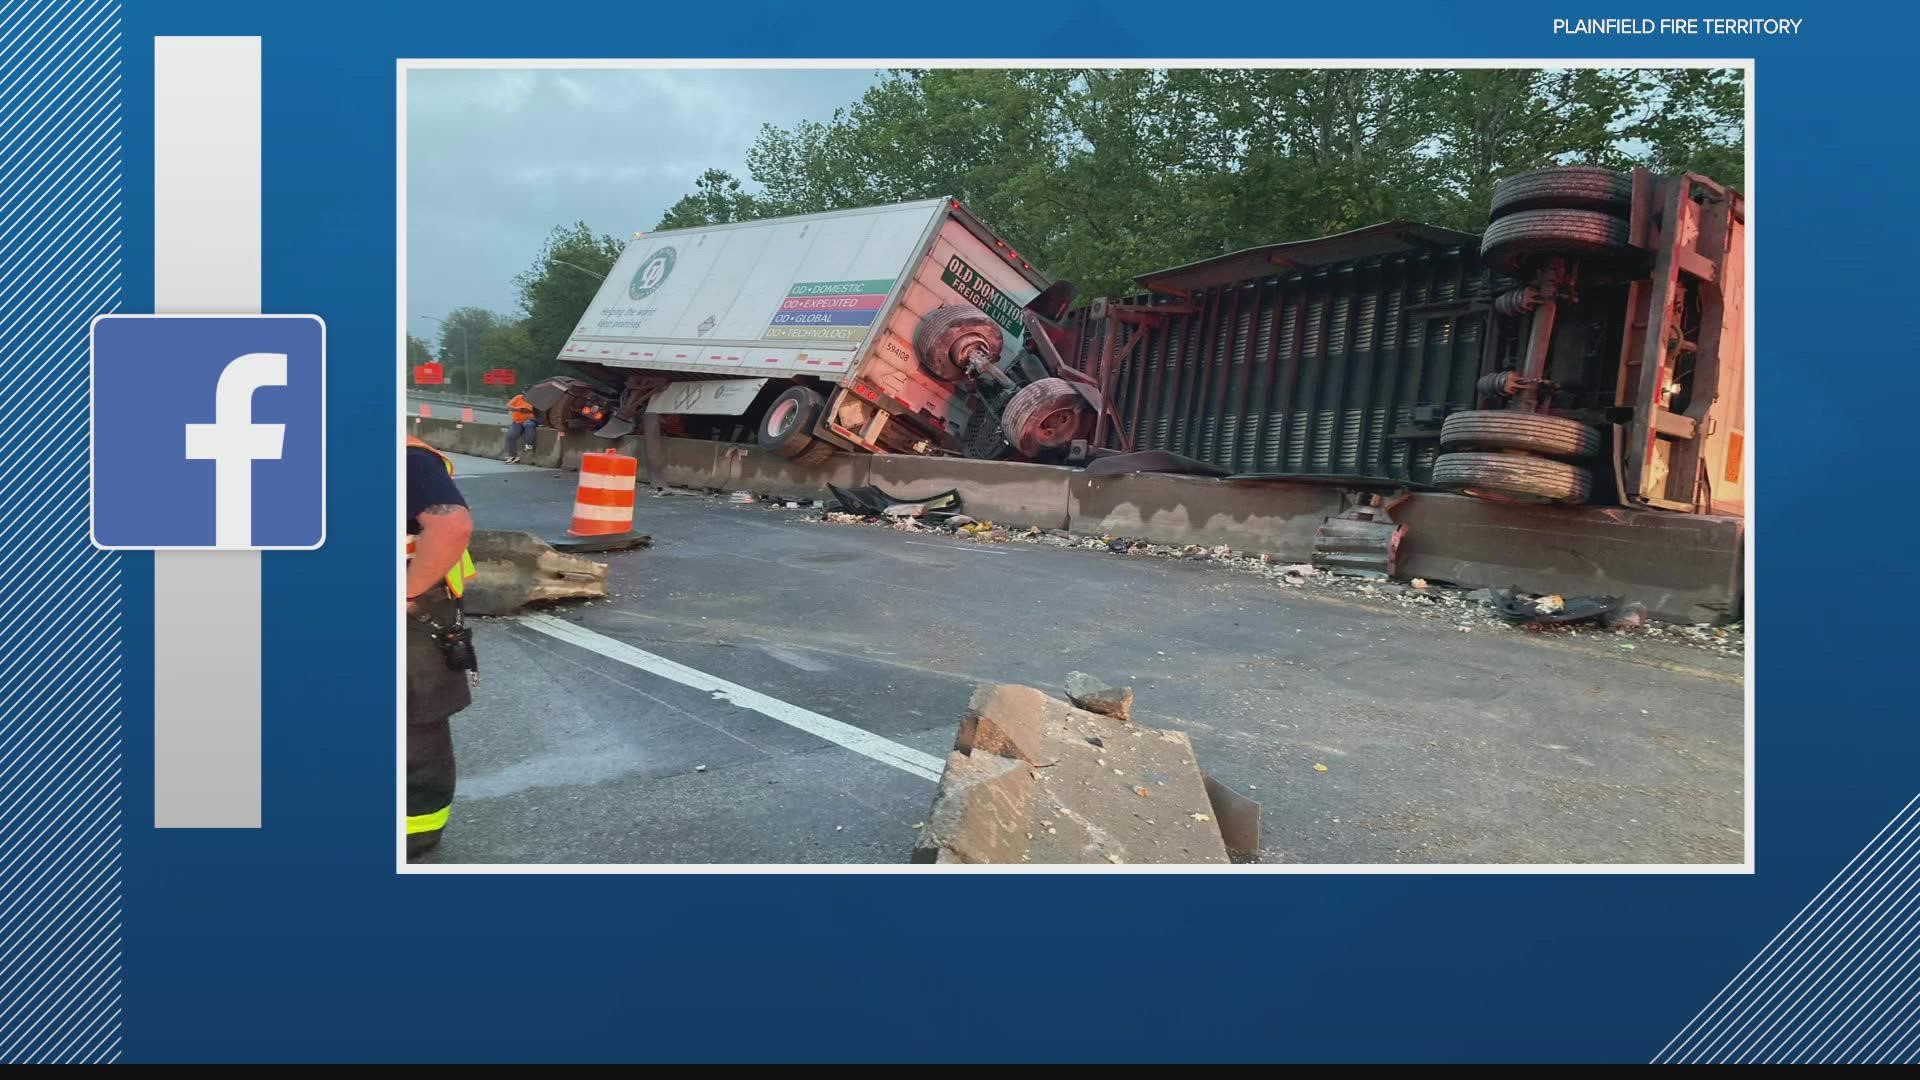 The Plainfield Fire Department shared photos showing a terrifying scene on I-70 after a semi-truck crashed in a construction zone.